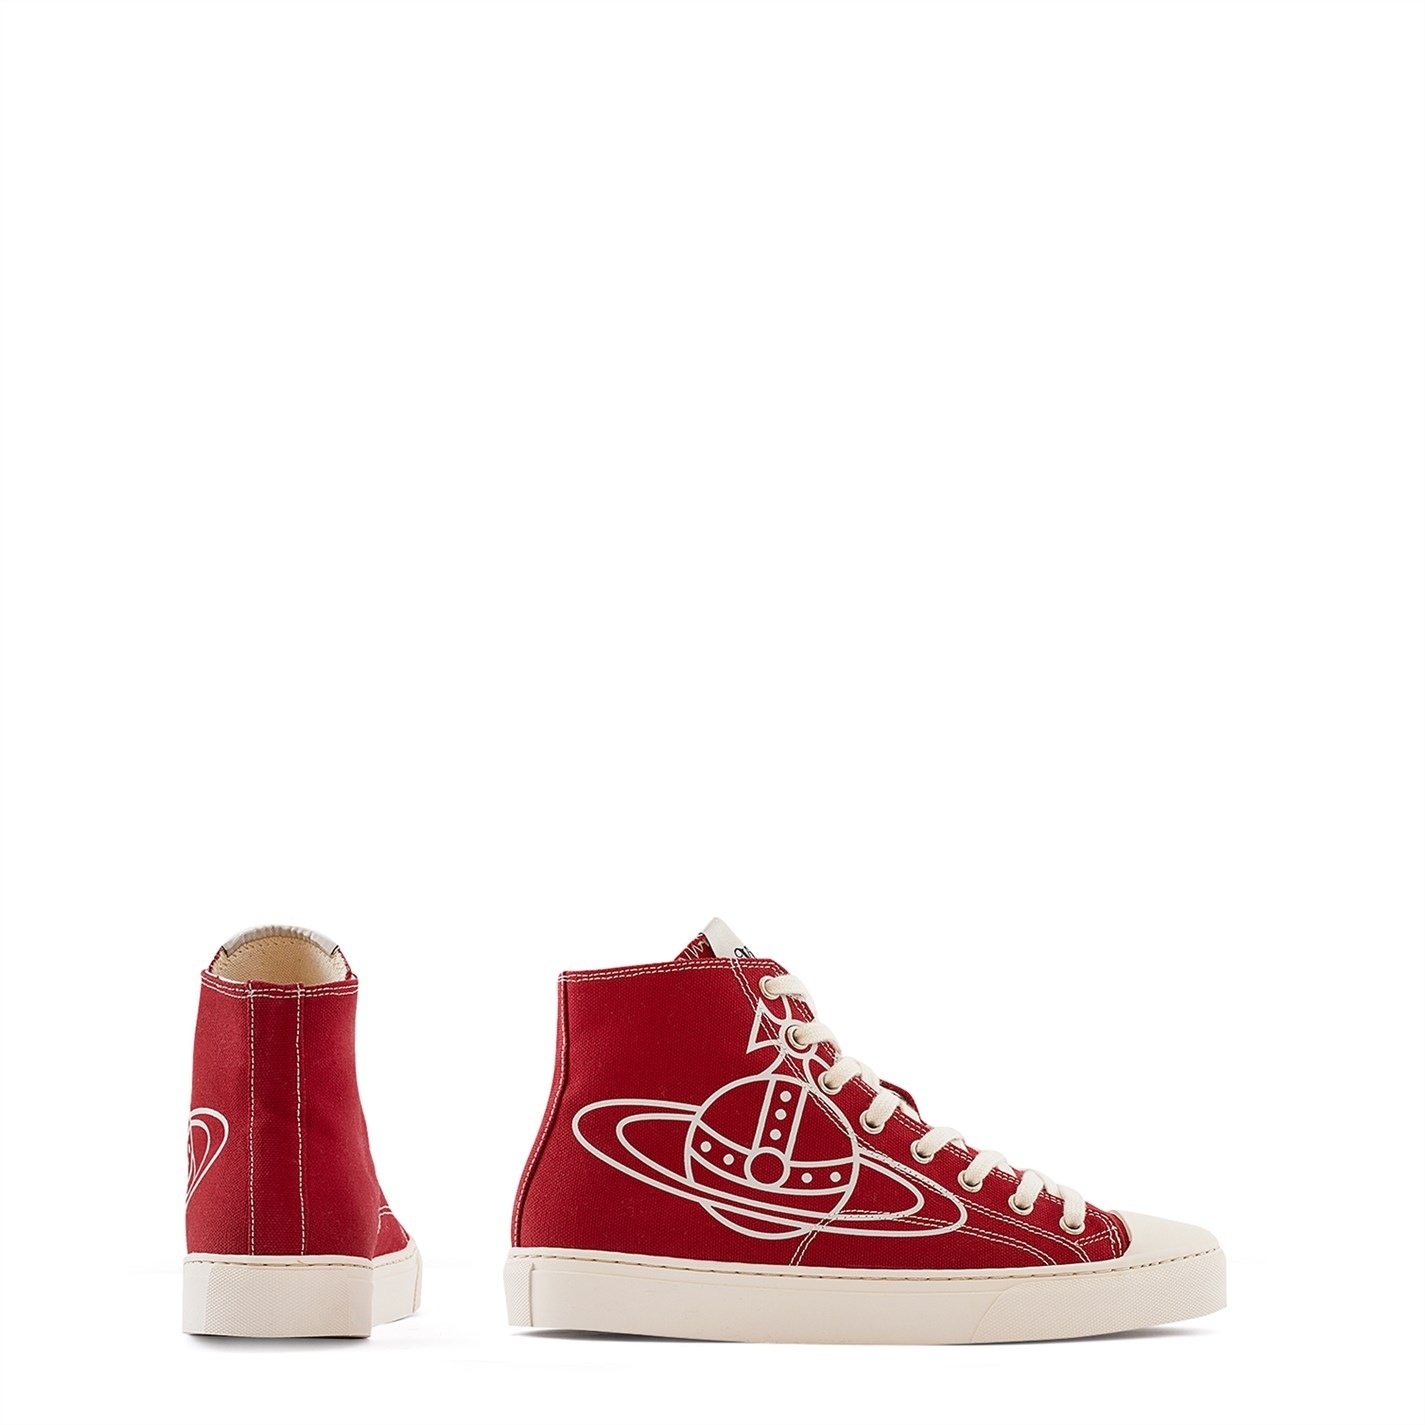 PLIMSOLL HIGH TOP TRAINERS - 4